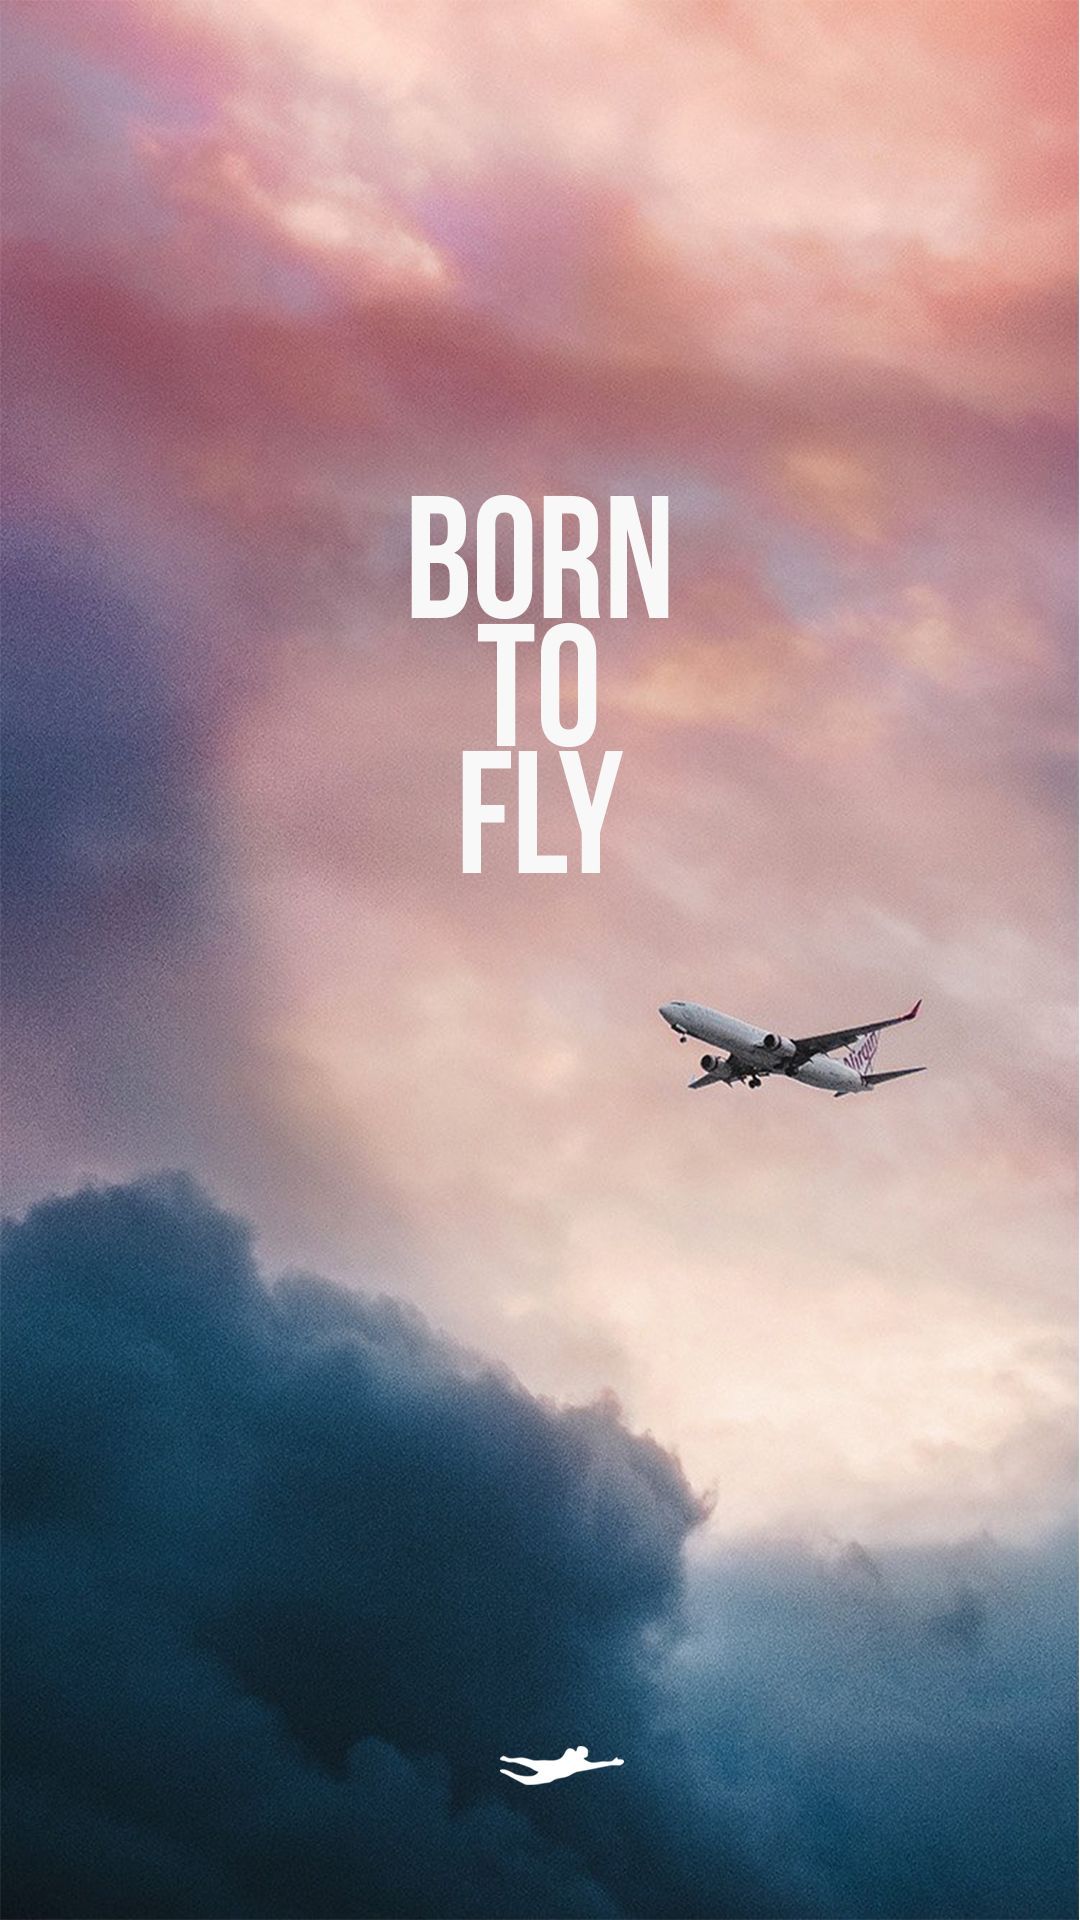 Born to fly. Goalkeeper Lifestyle. Airplane wallpaper, Airplane photography, Fly quotes